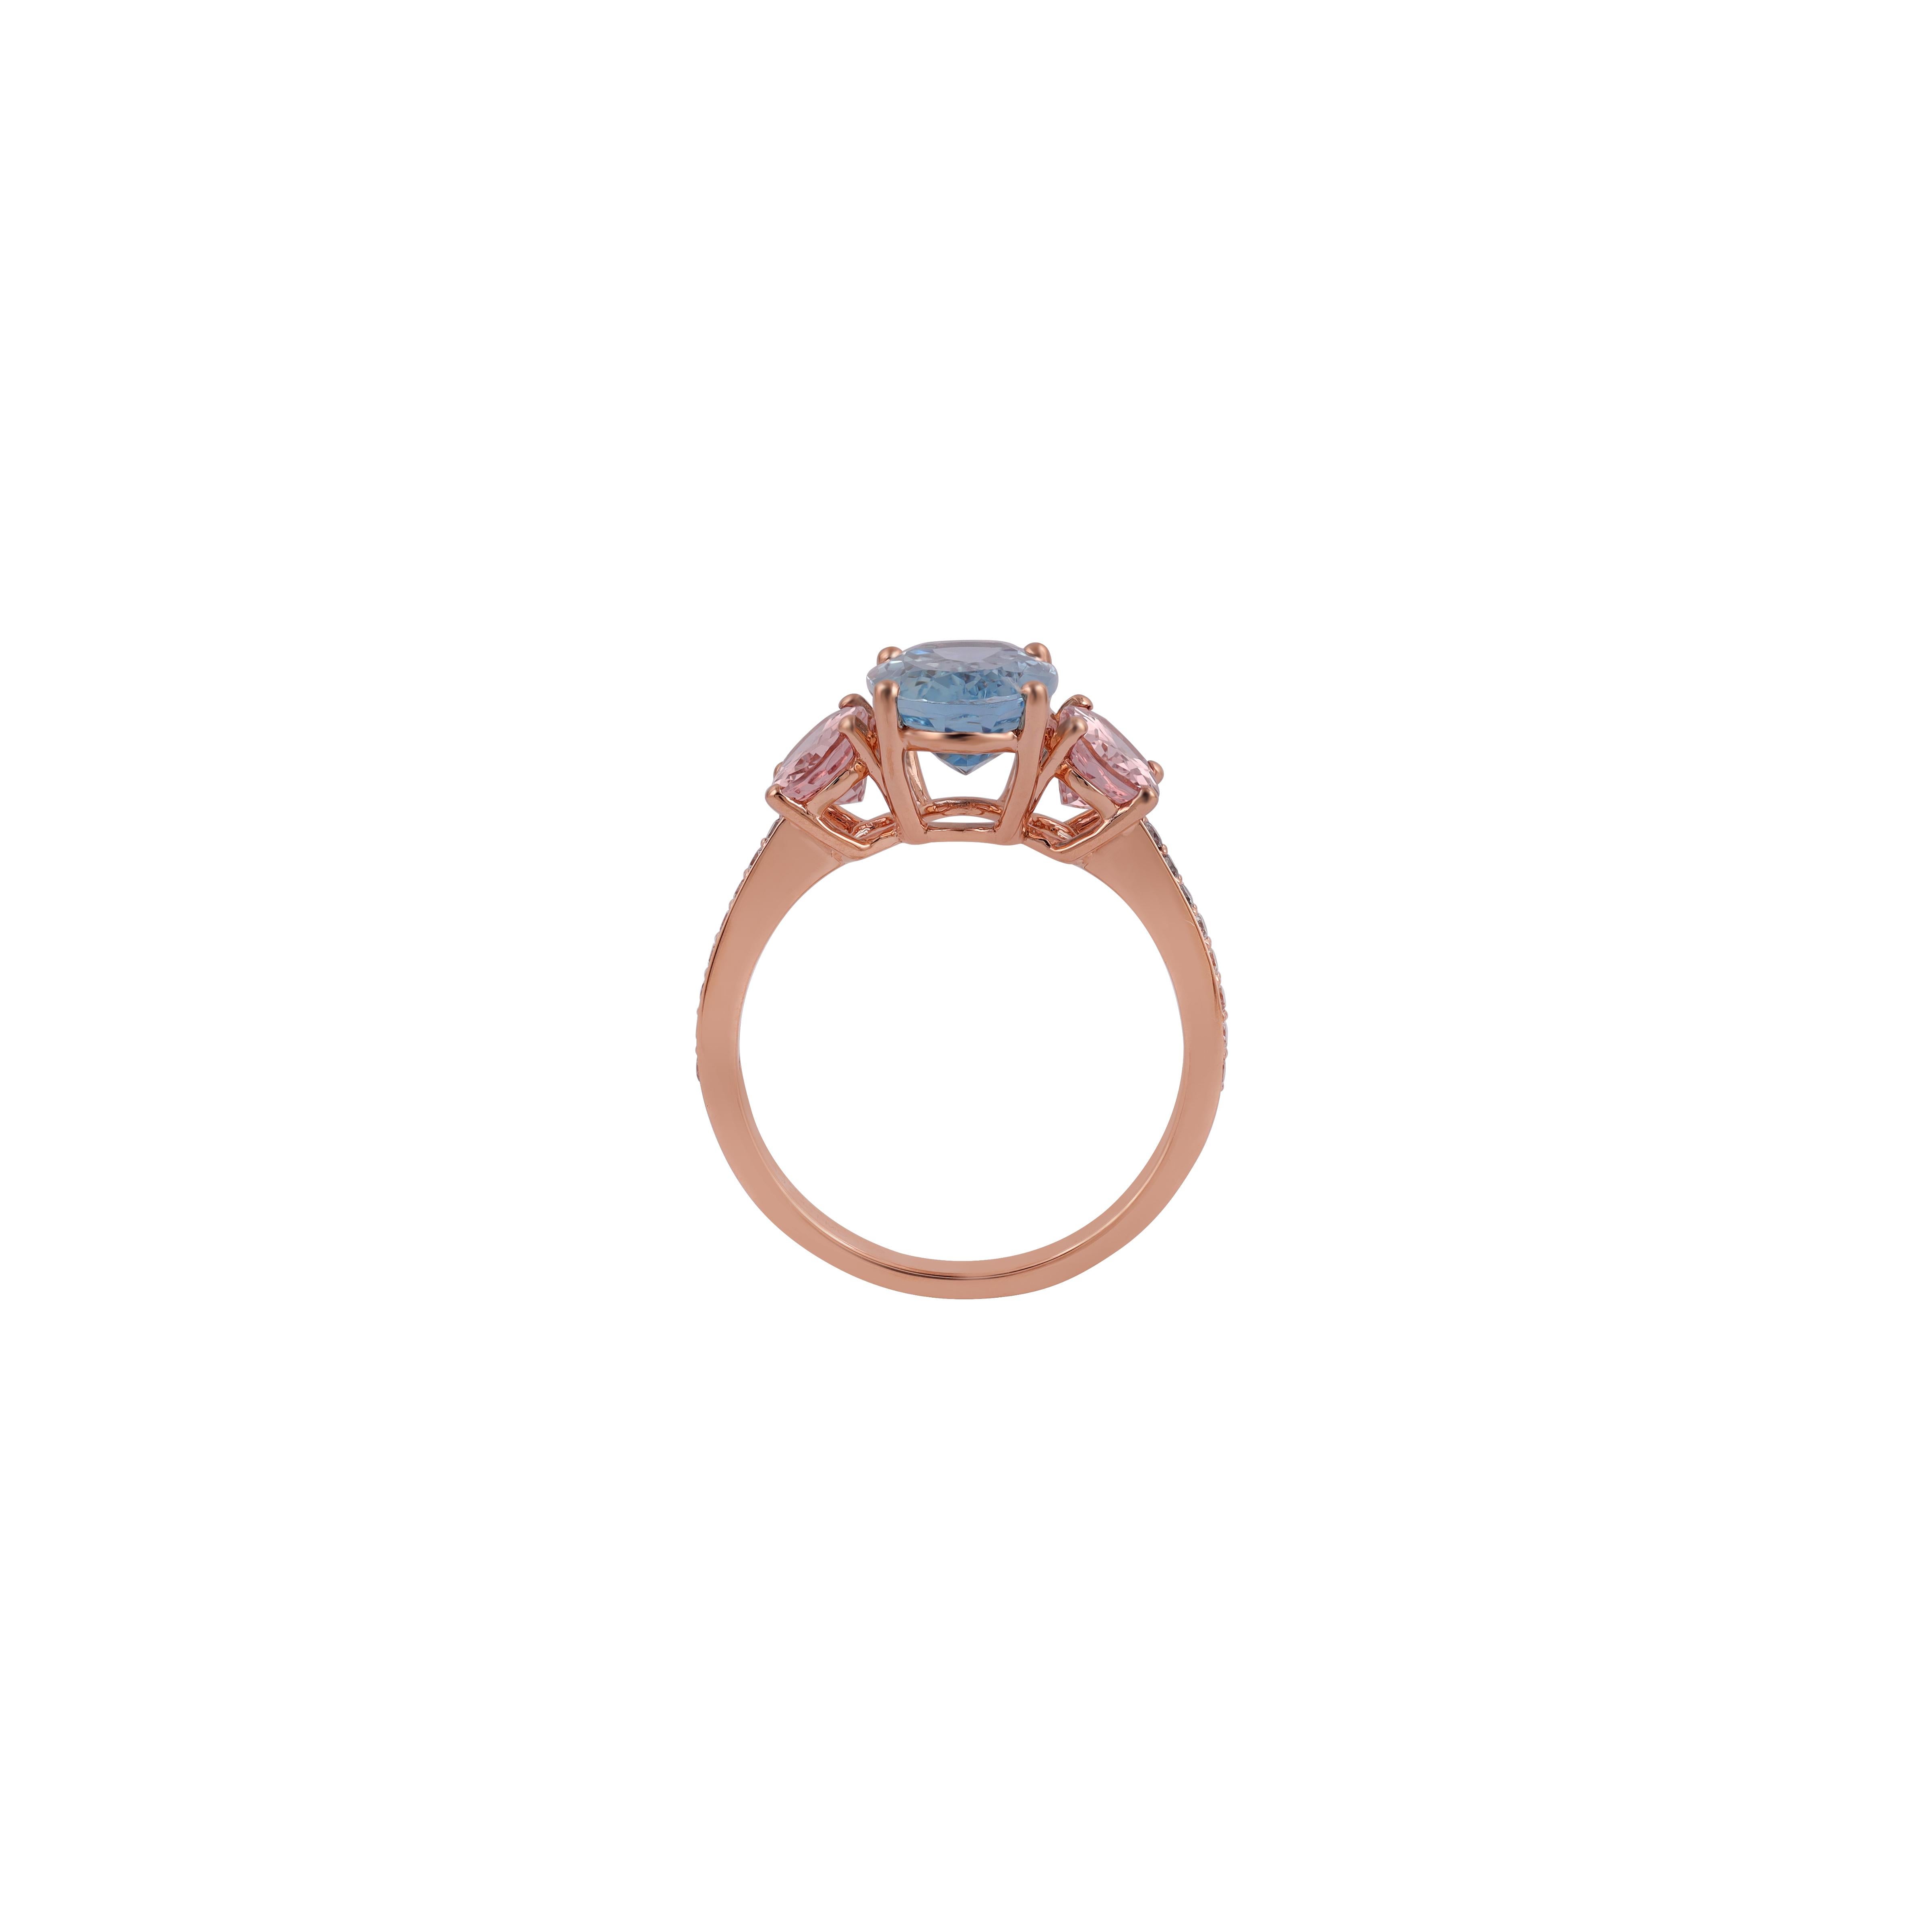 Elegant Oval Cut Aquamarine And Morganite Ring with  Sparkly Round cut Diamonds in 18kt Rose Gold mounting.

Aquamarine (2.46 Carat) - Embodies the splendor of the sea, Unparalleled clarity and a soft, delicate tone which radiates life, vibrancy and